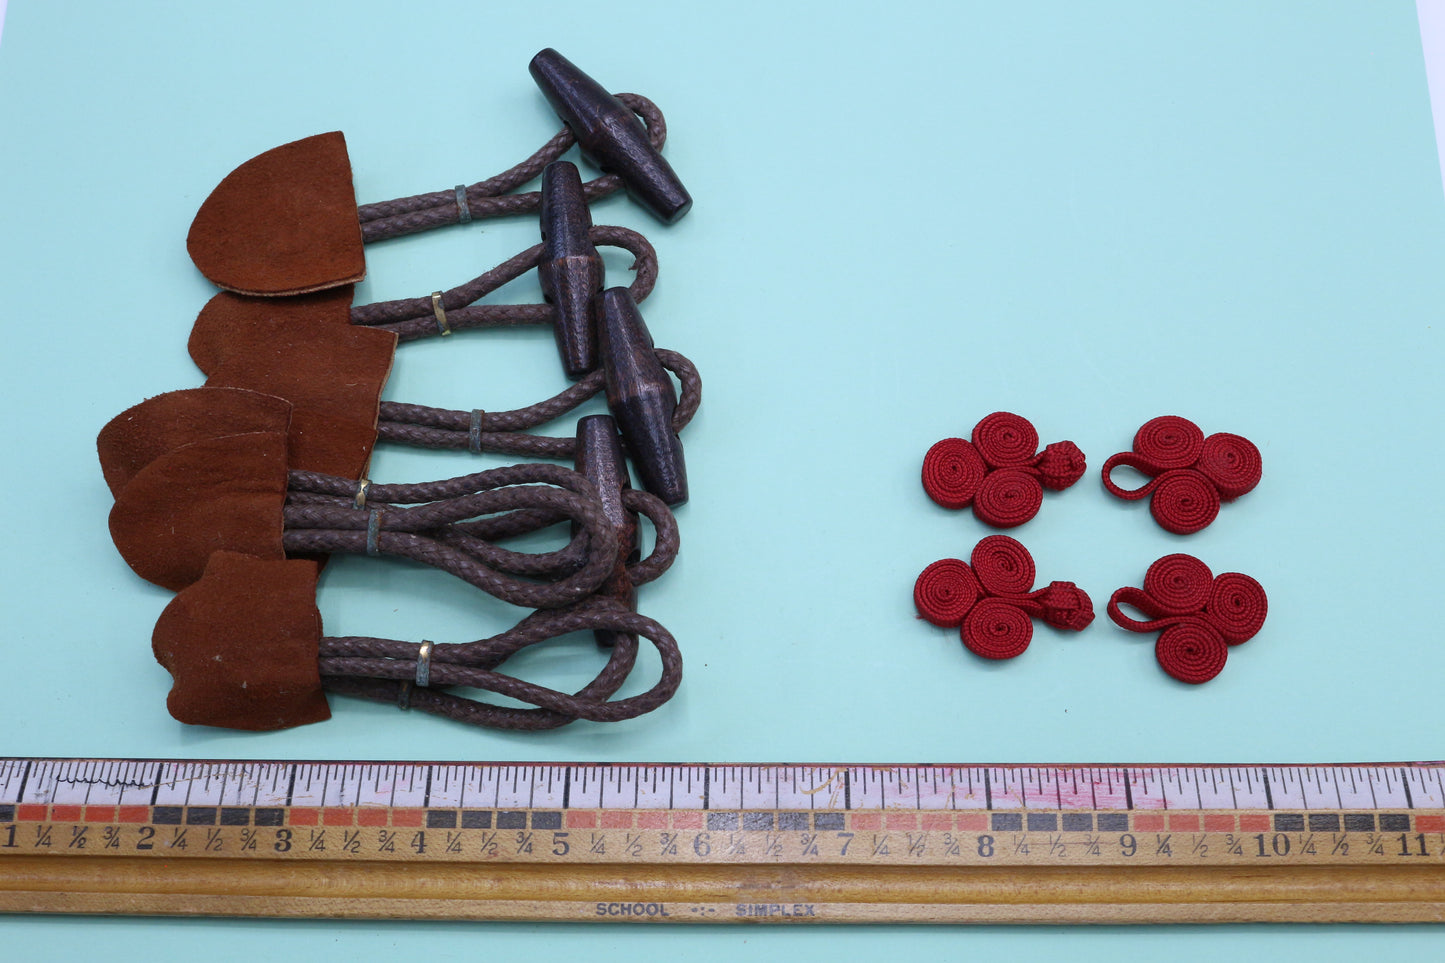 Toggle Buttons or Red Asian Knot Buttons